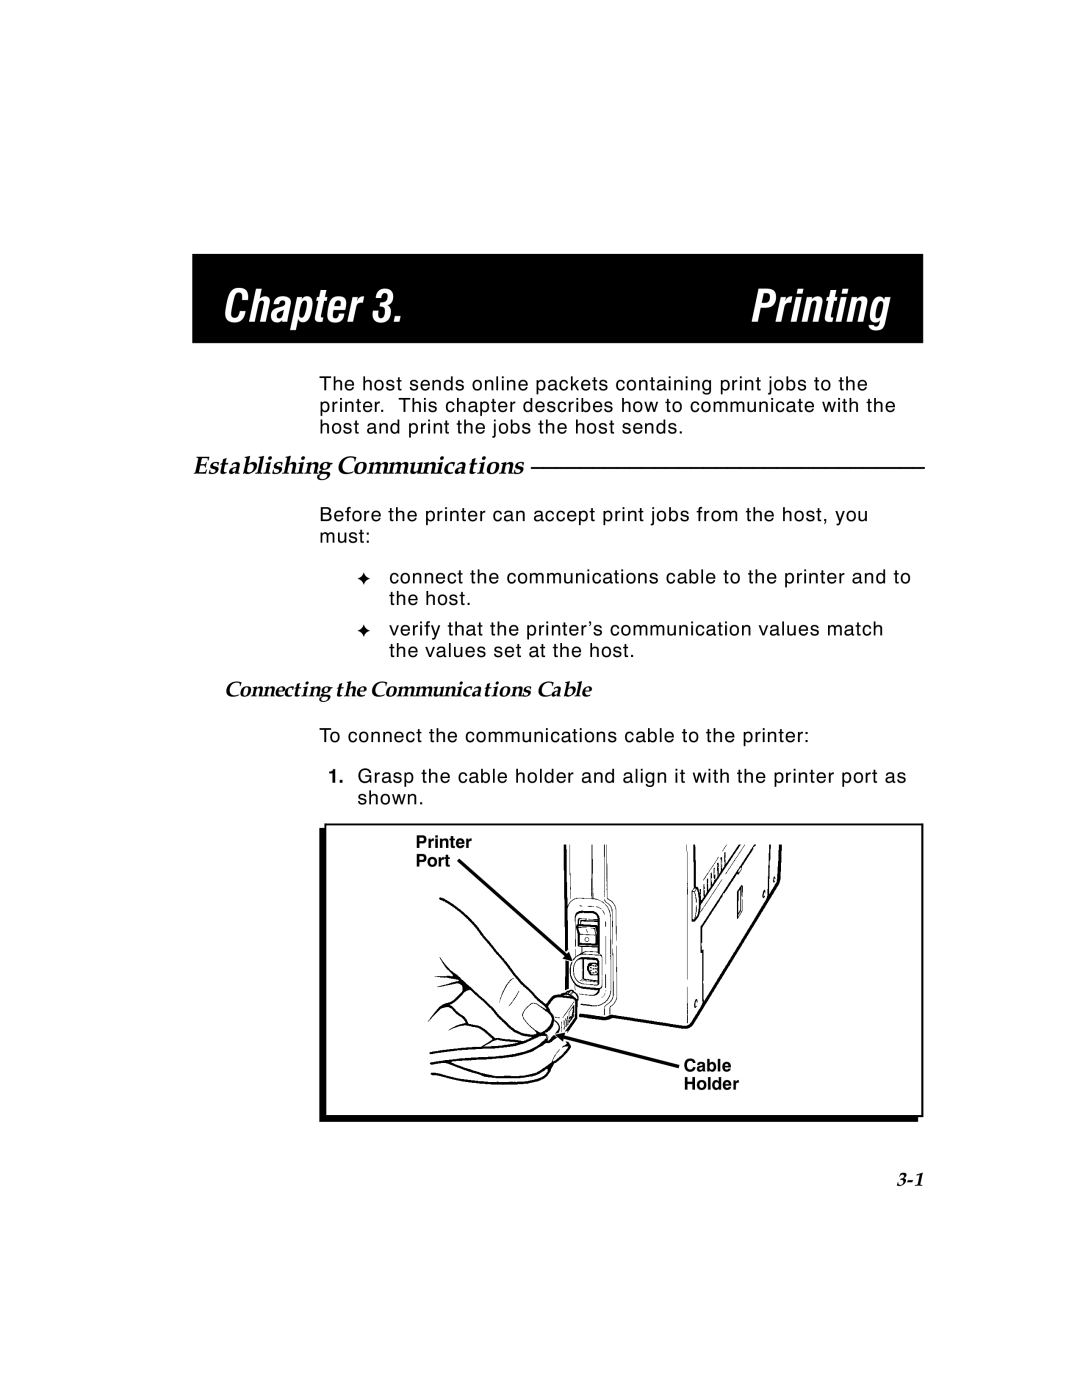 Paxar 4 manual Printing, Establishing Communications, Connecting the Communications Cable, Chapter 